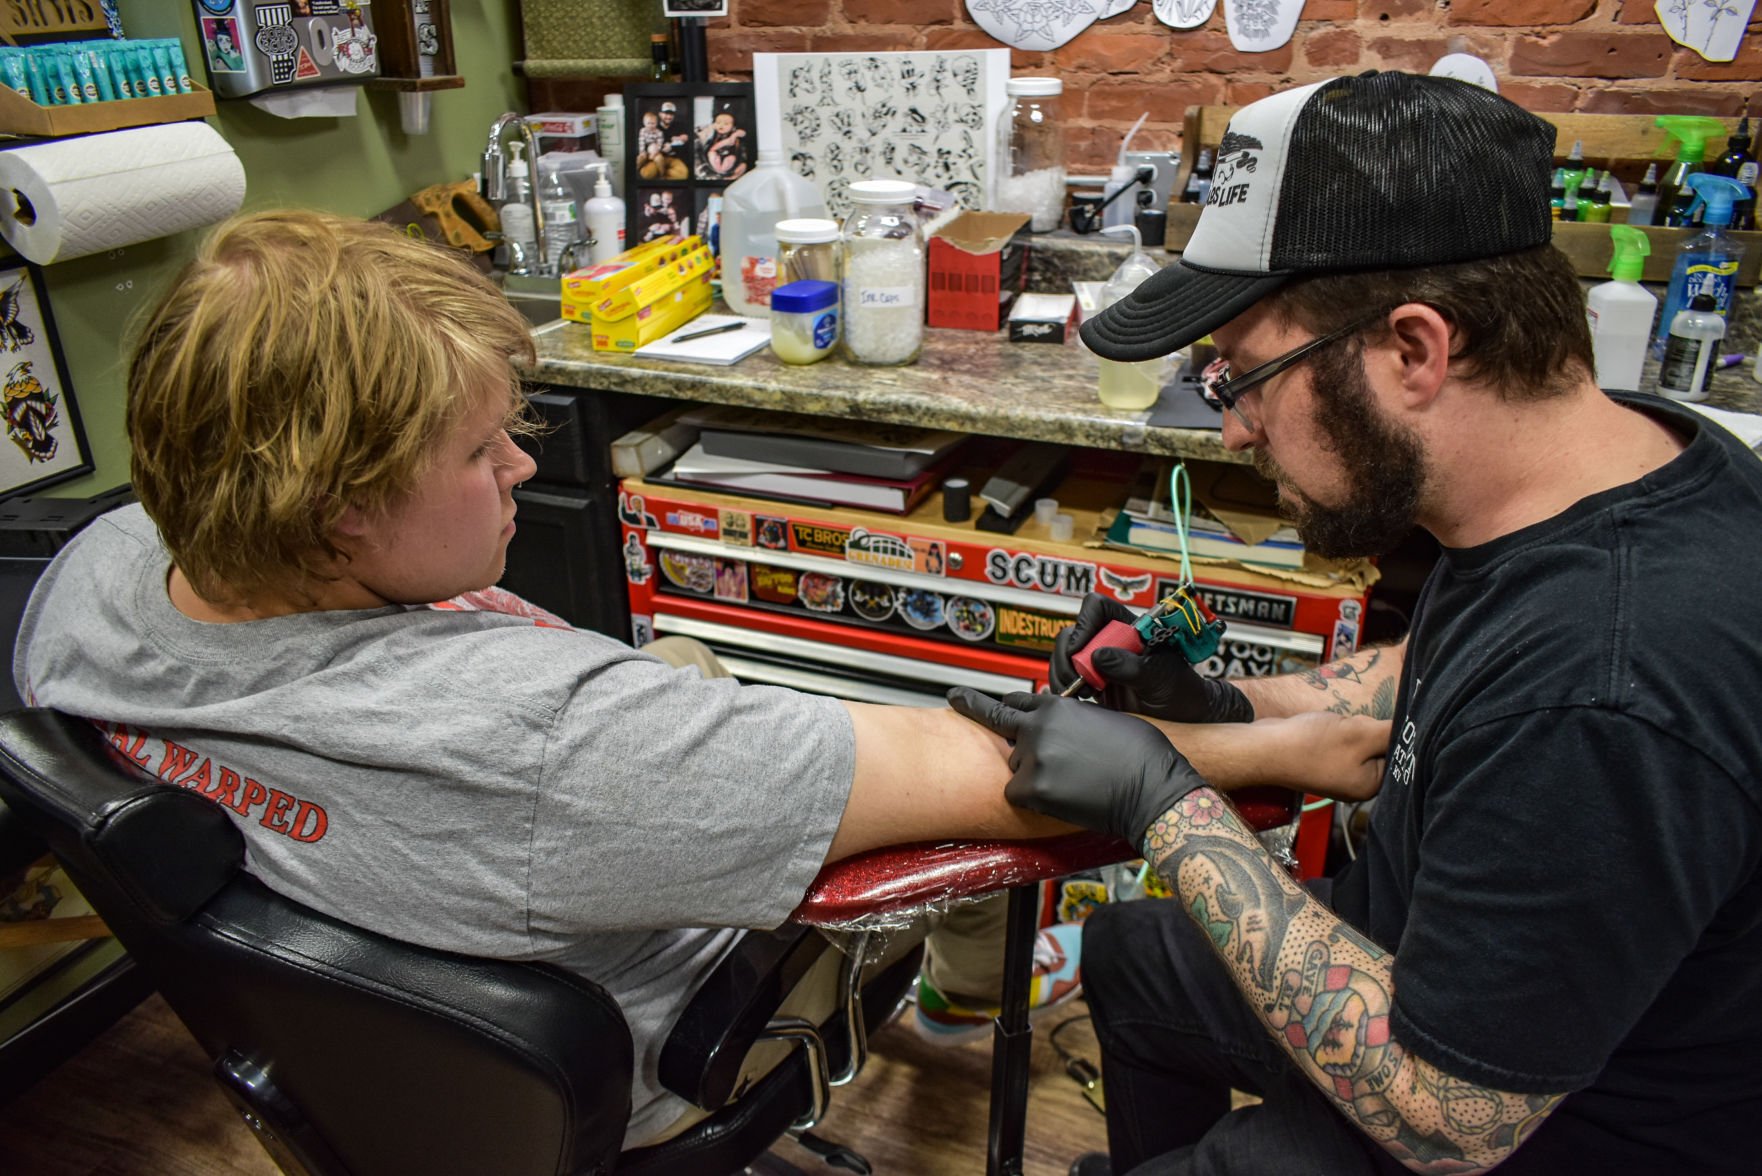 Tattoo fundraiser draws crowd to assist with tornado recovery  Business   paducahsuncom